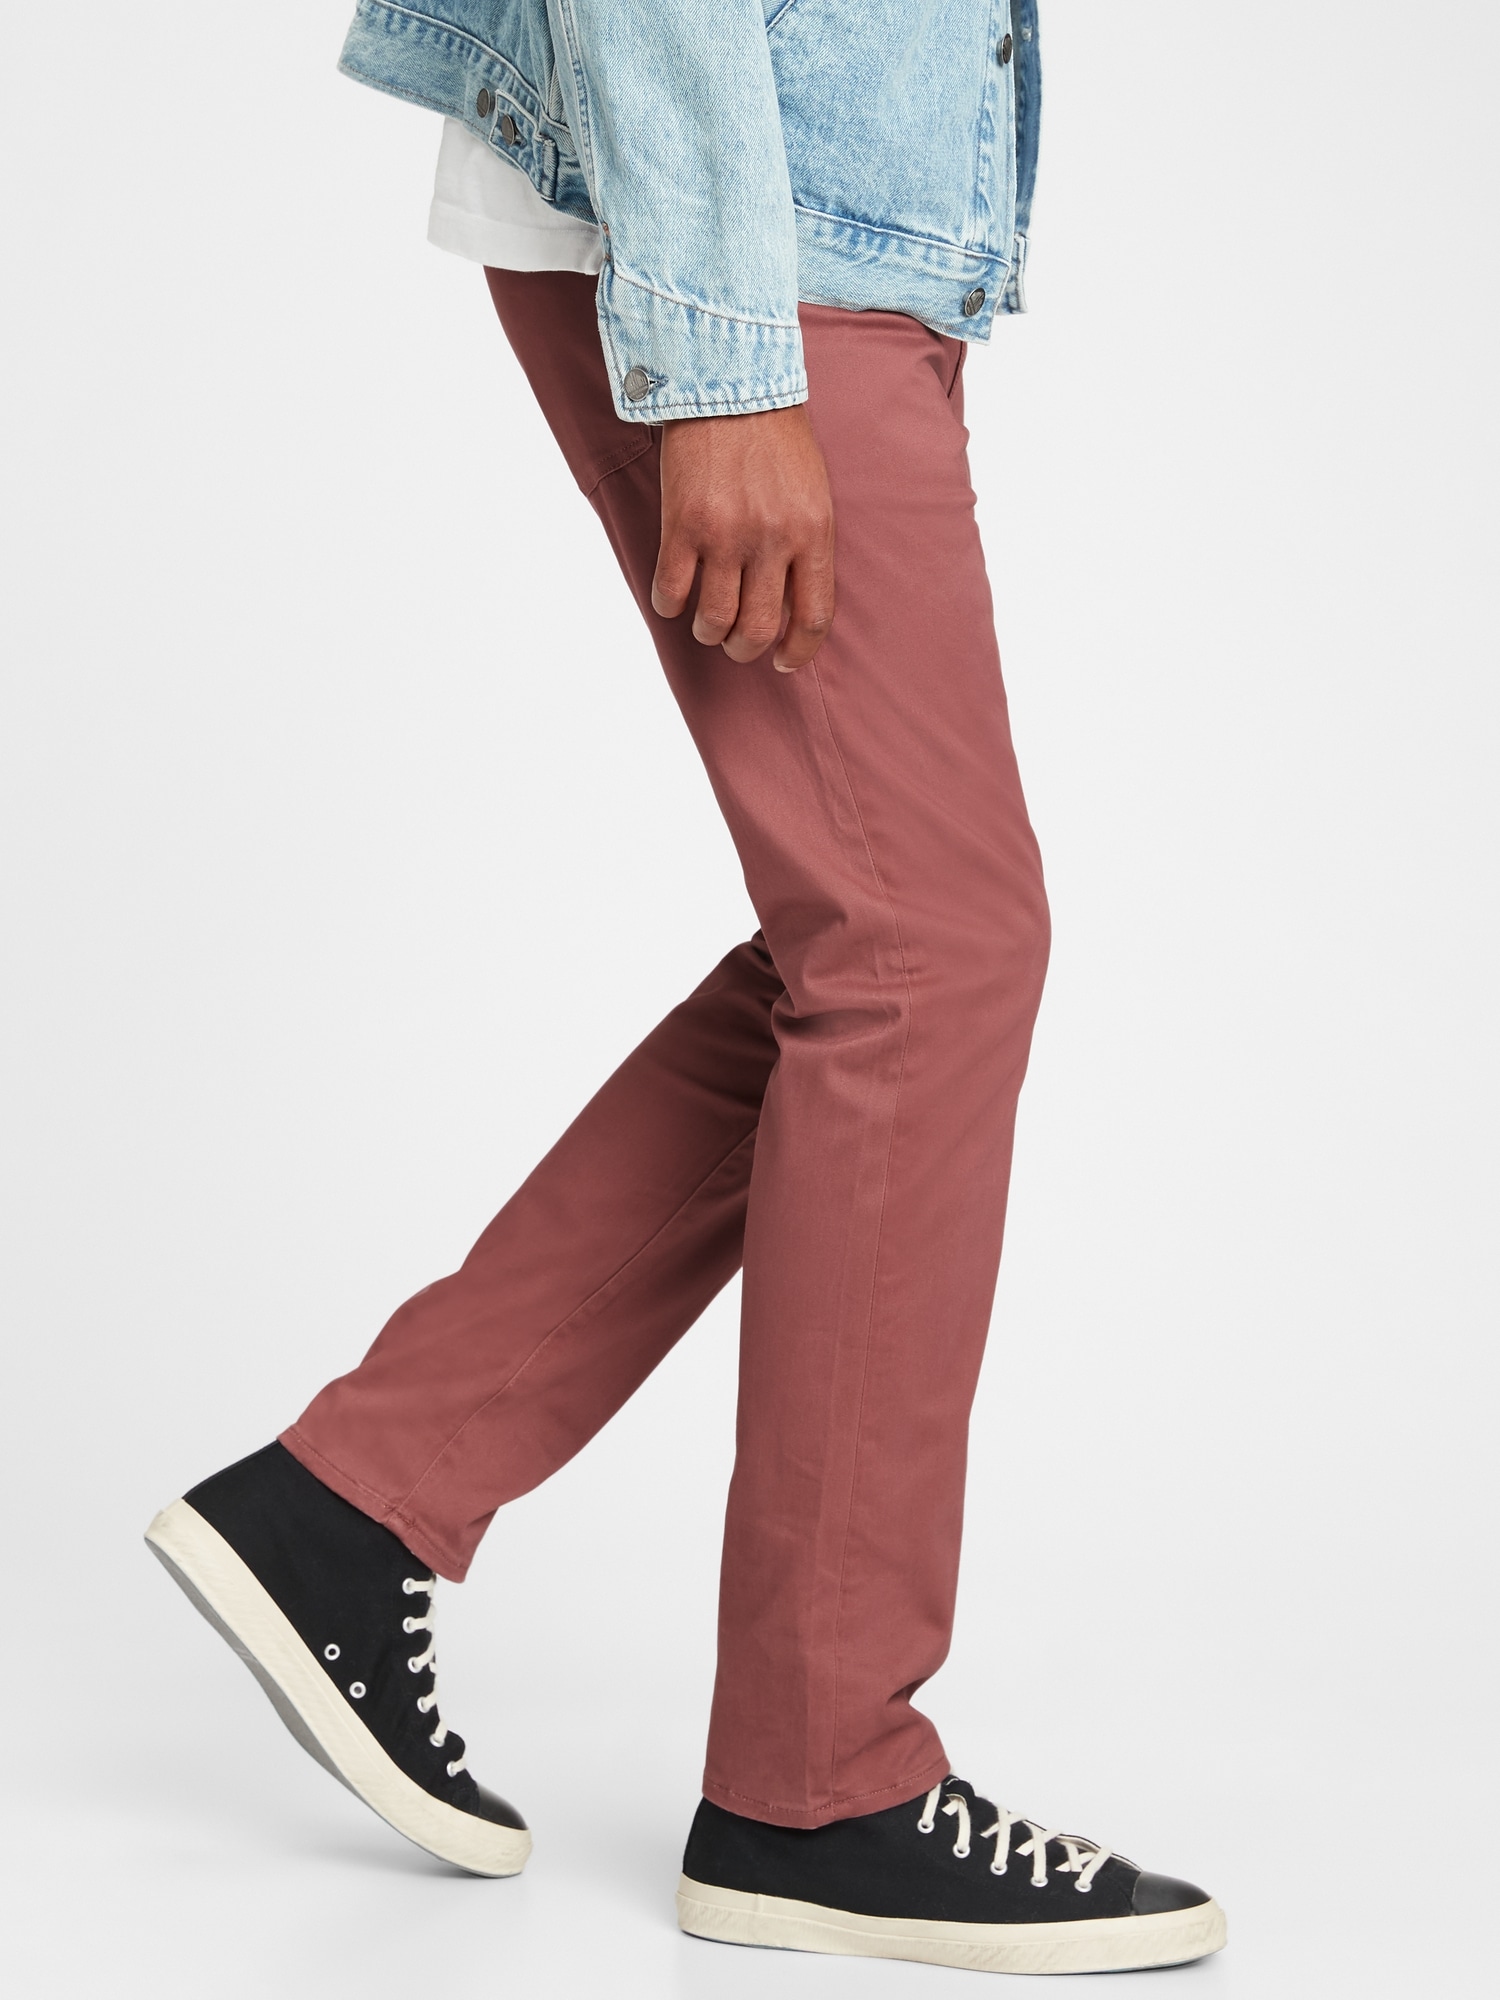 Buy Gap Stretch Slim Fit Soft Wear Jeans from the Gap online shop